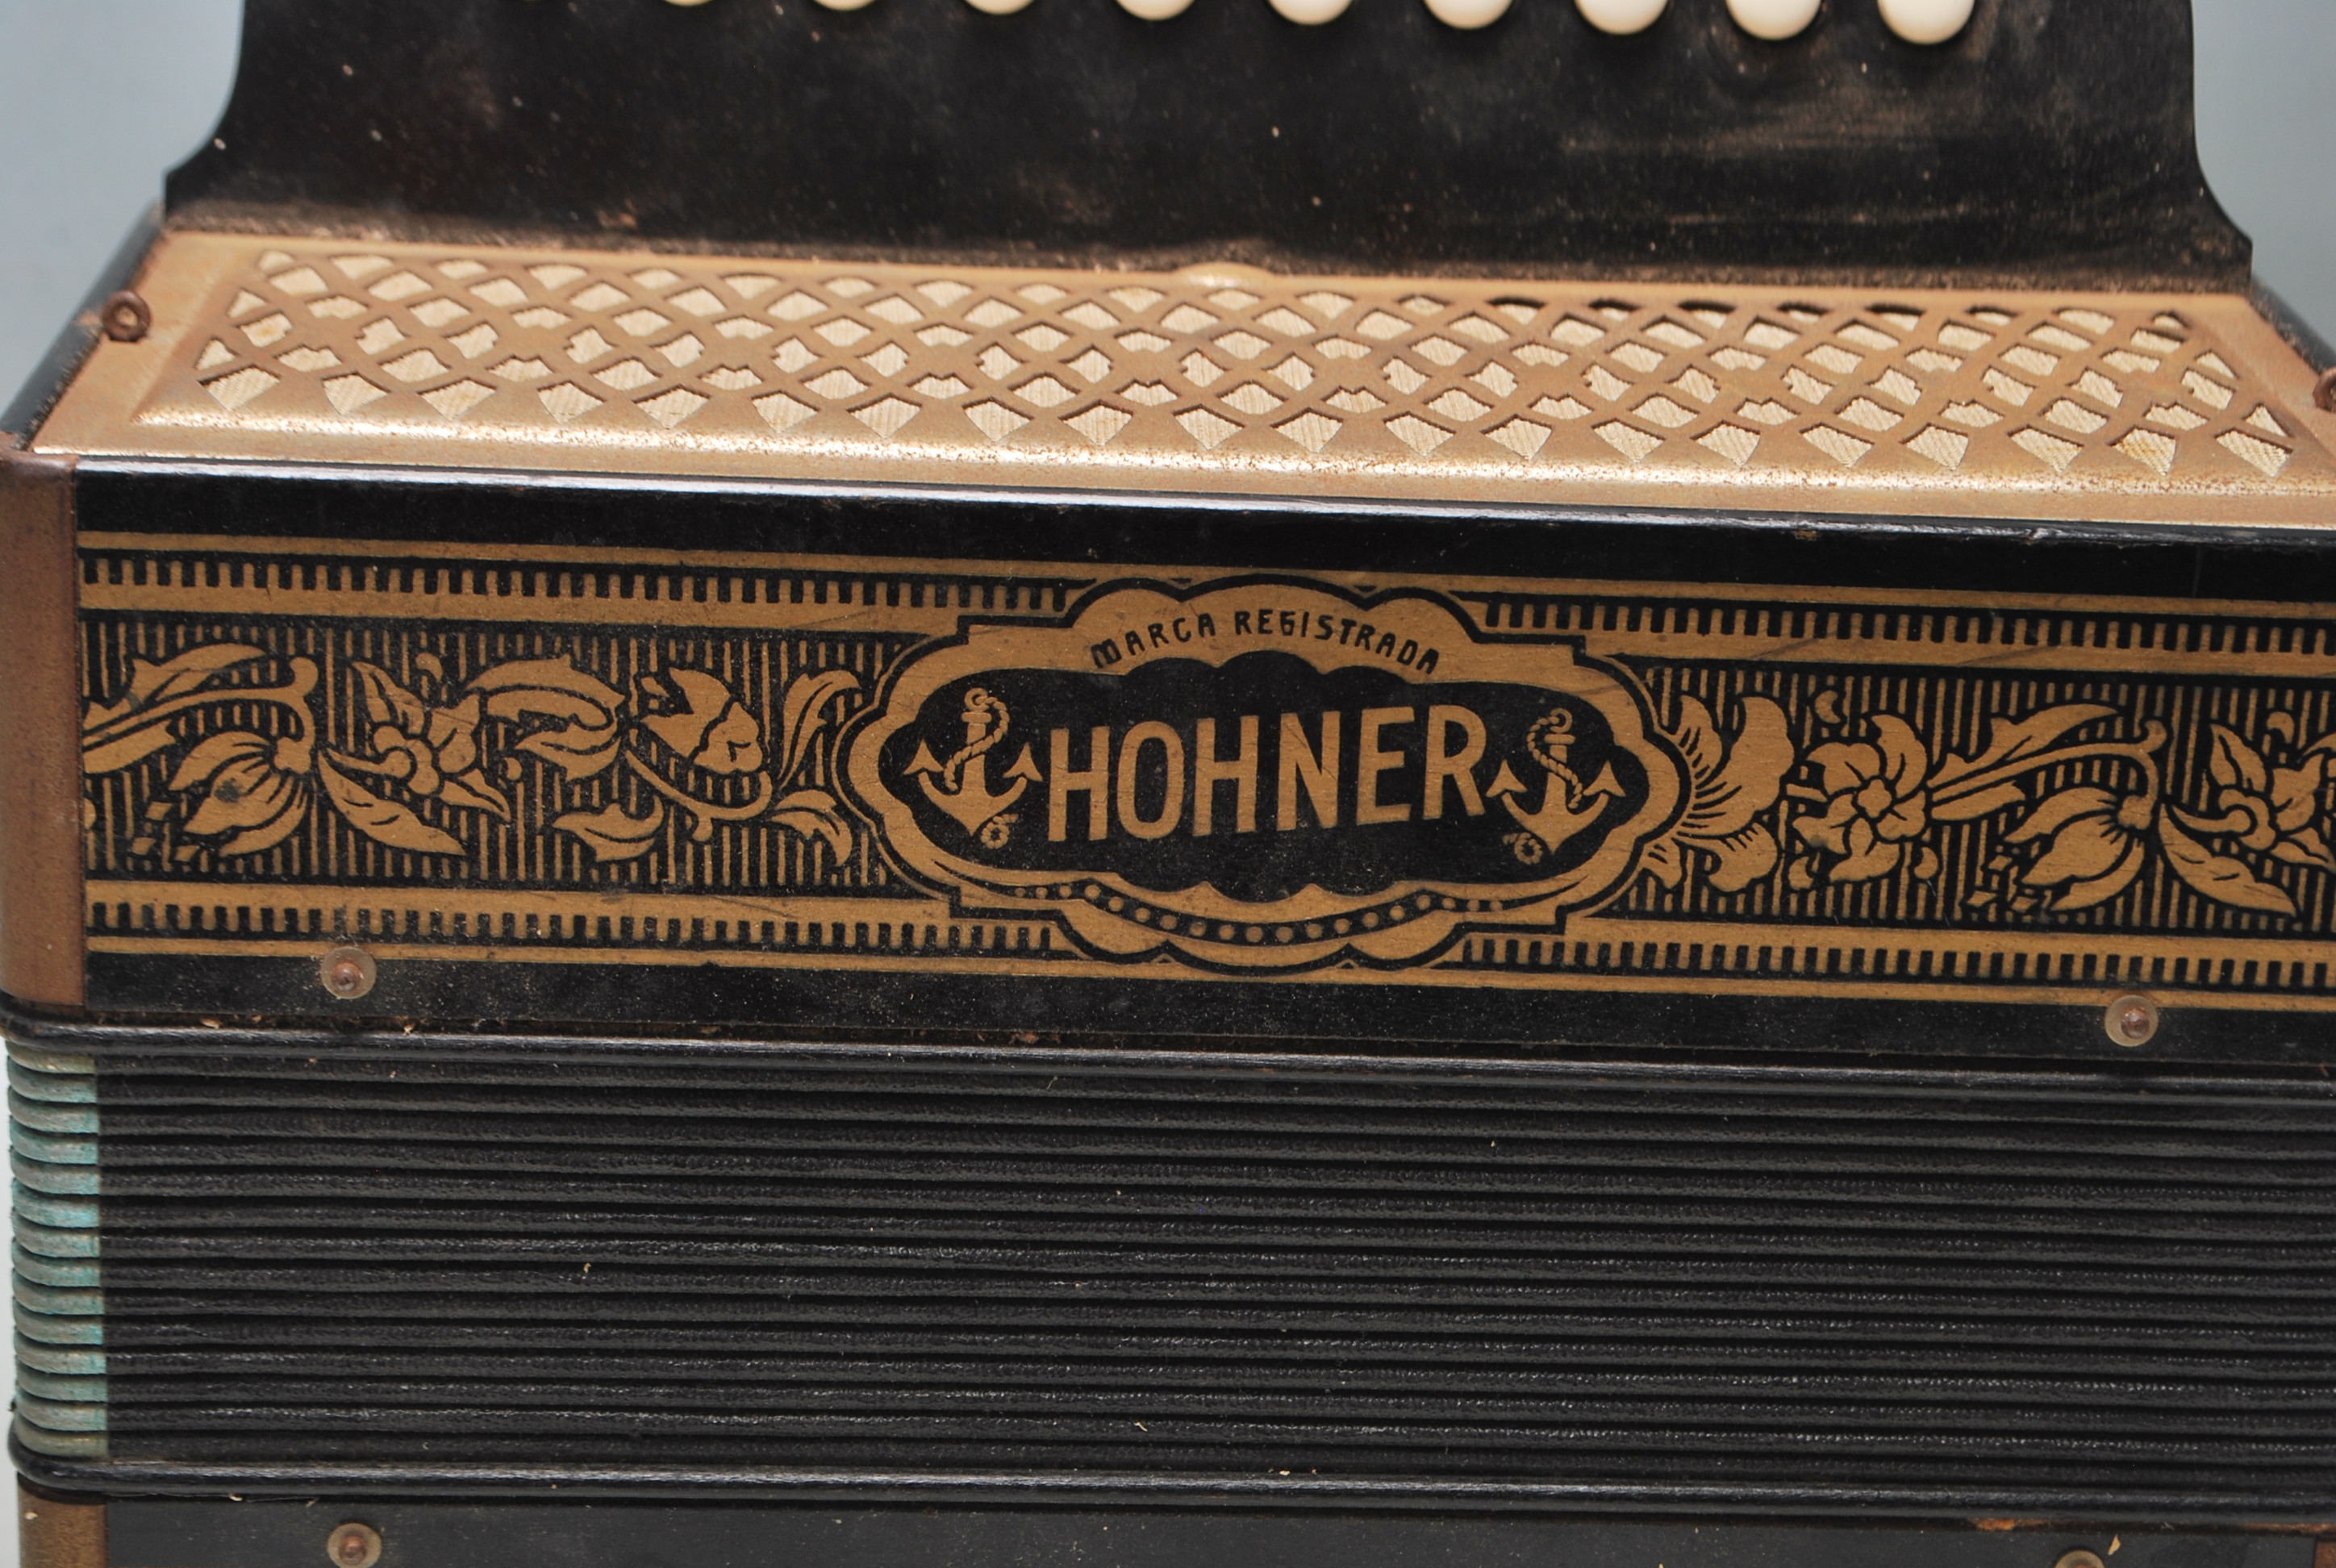 EARLY 20TH CENTURY 1930S VINTAGE ACCORDIAN BY HOHNER - Image 2 of 7